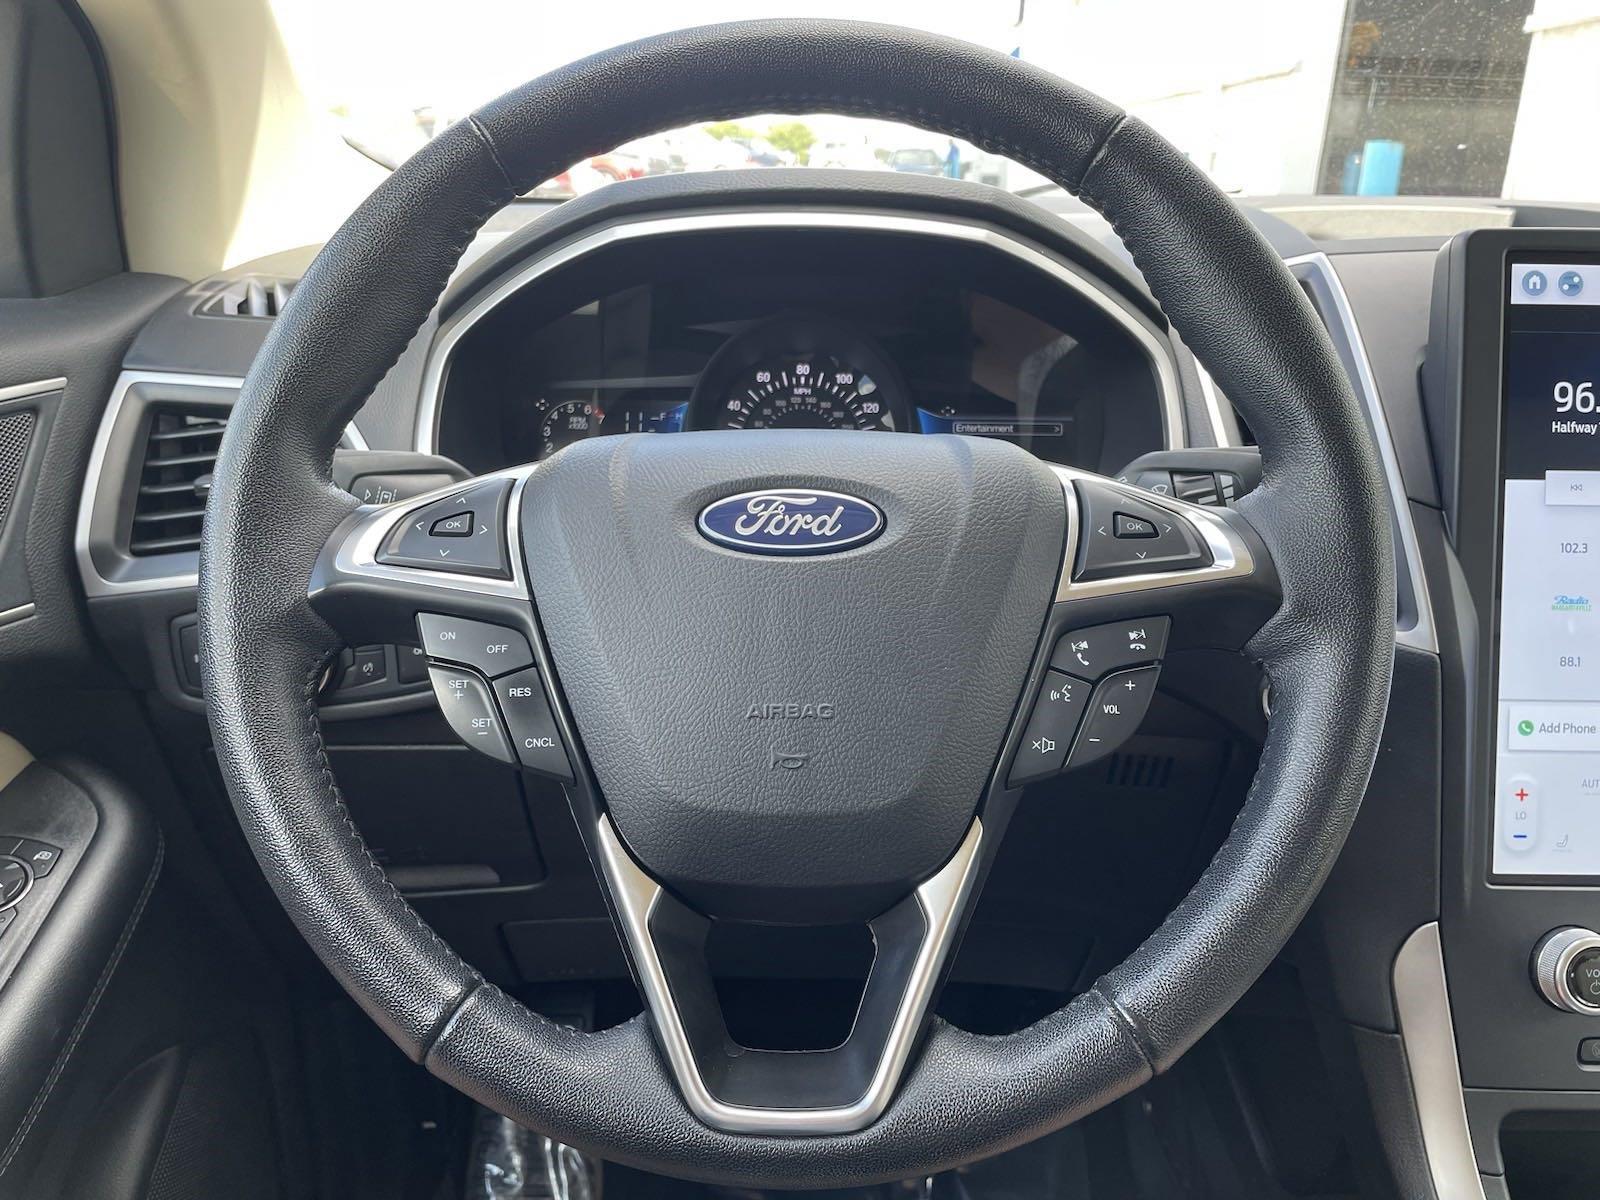 Used 2021 Ford Edge SEL SUV for sale in Lincoln NE